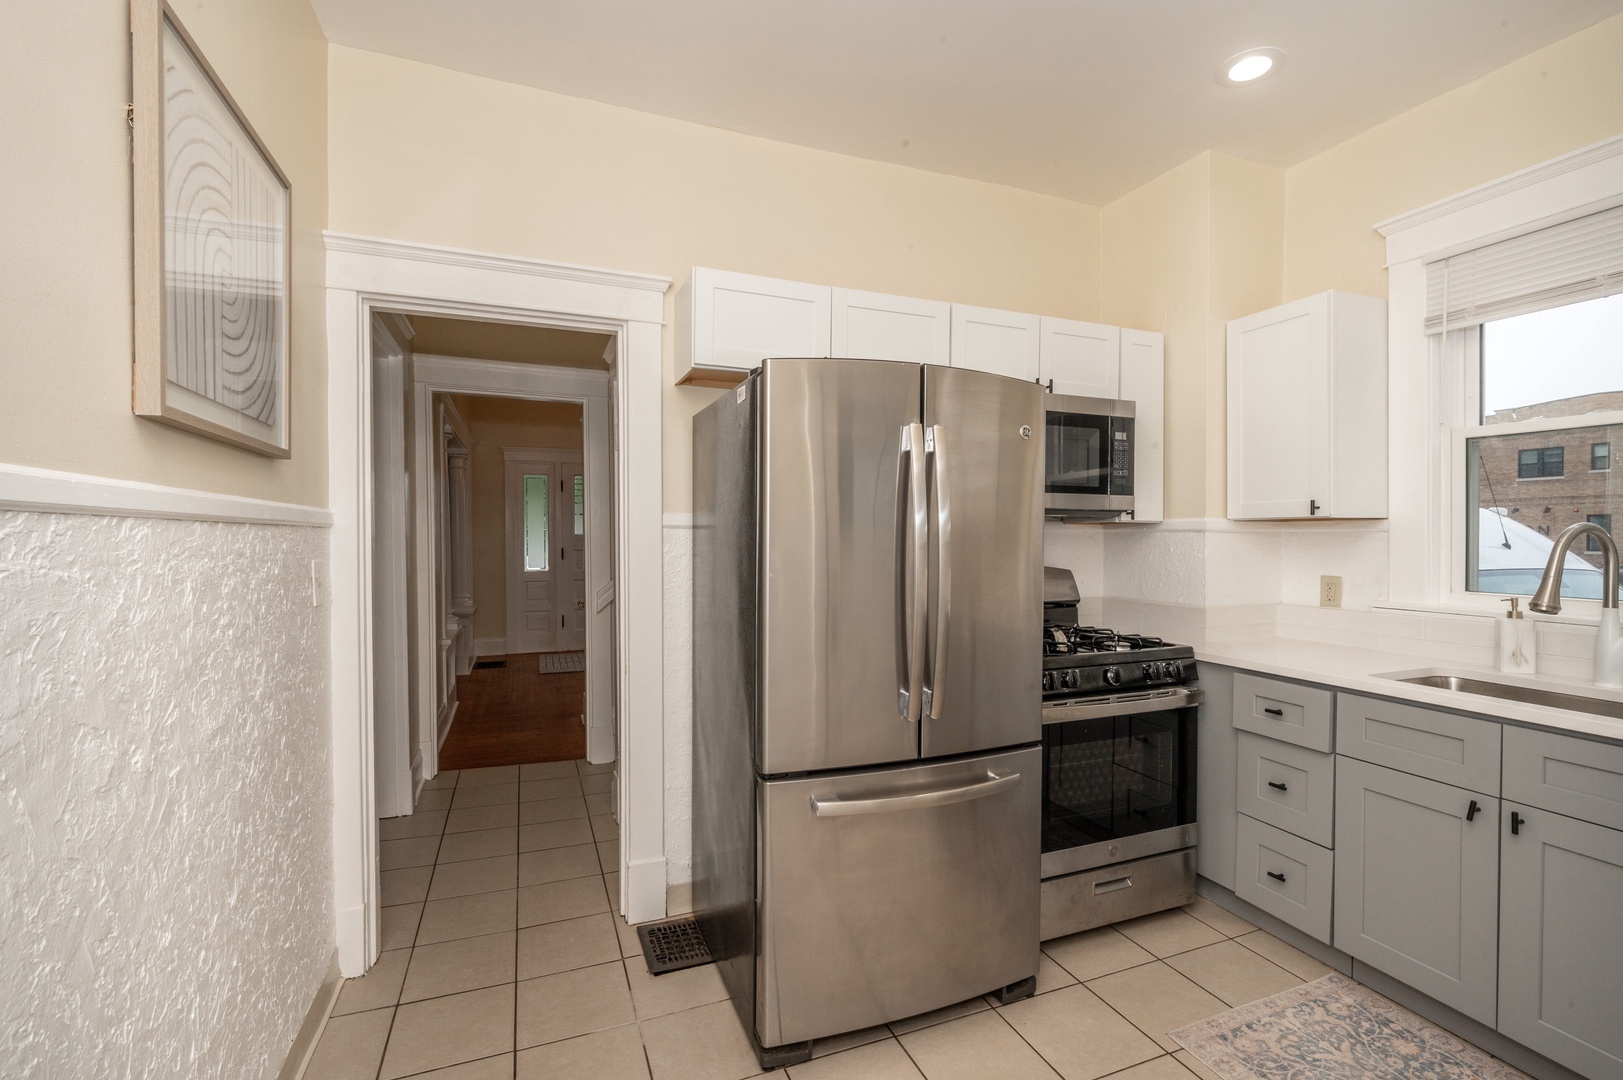 The updated kitchen offers ample storage space & fantastic amenities